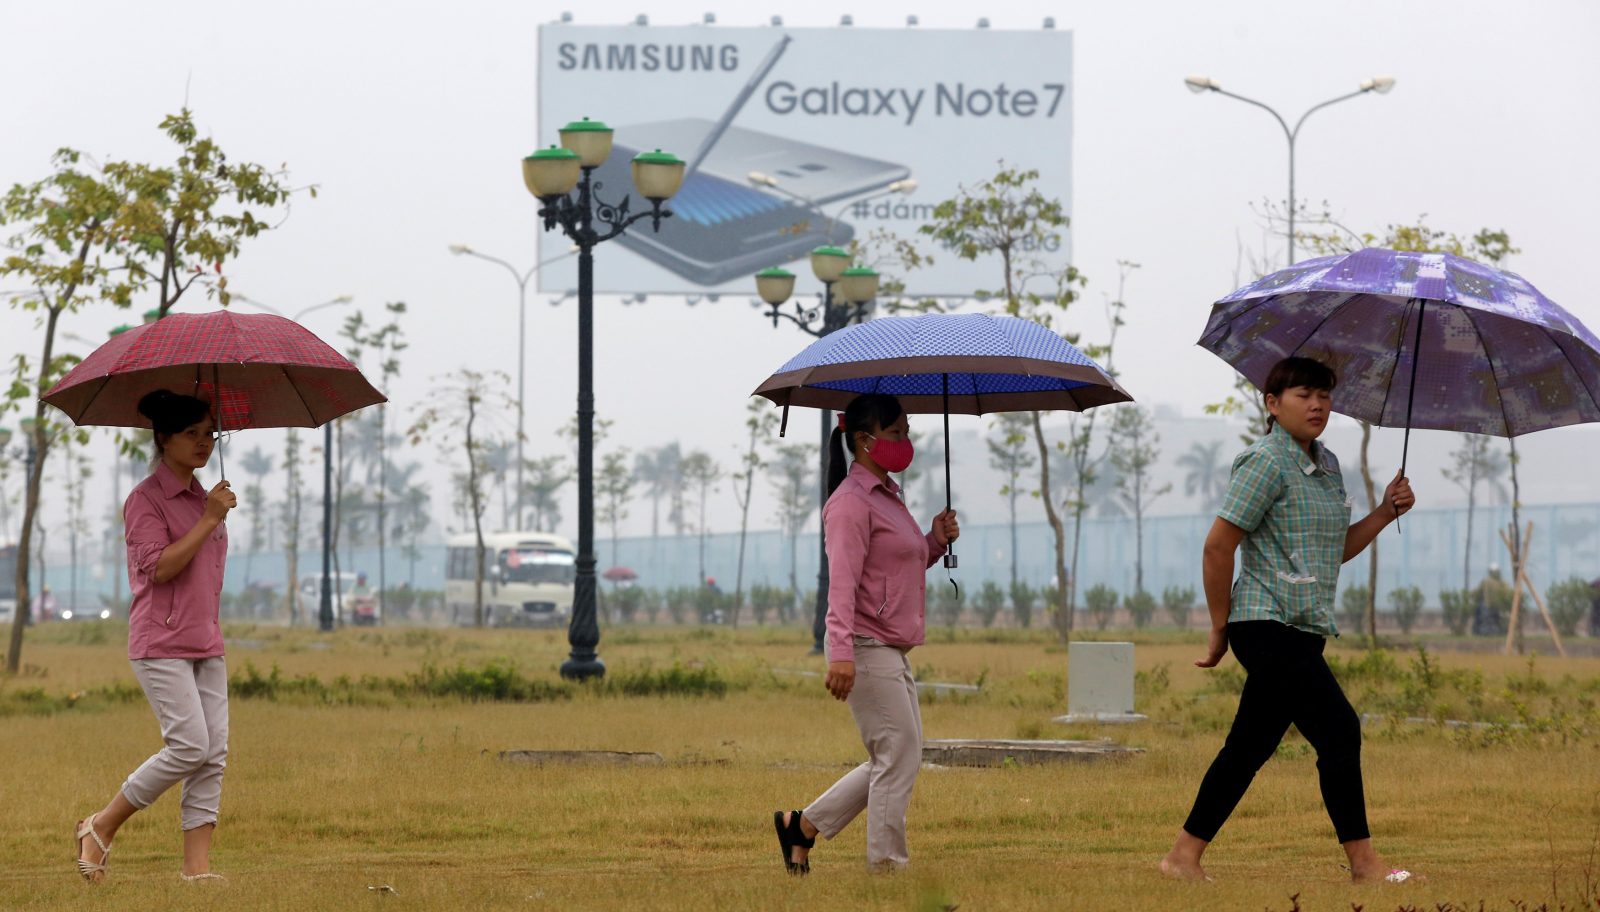 Samsung allegedly exposed workers to toxic chemicals, says ...